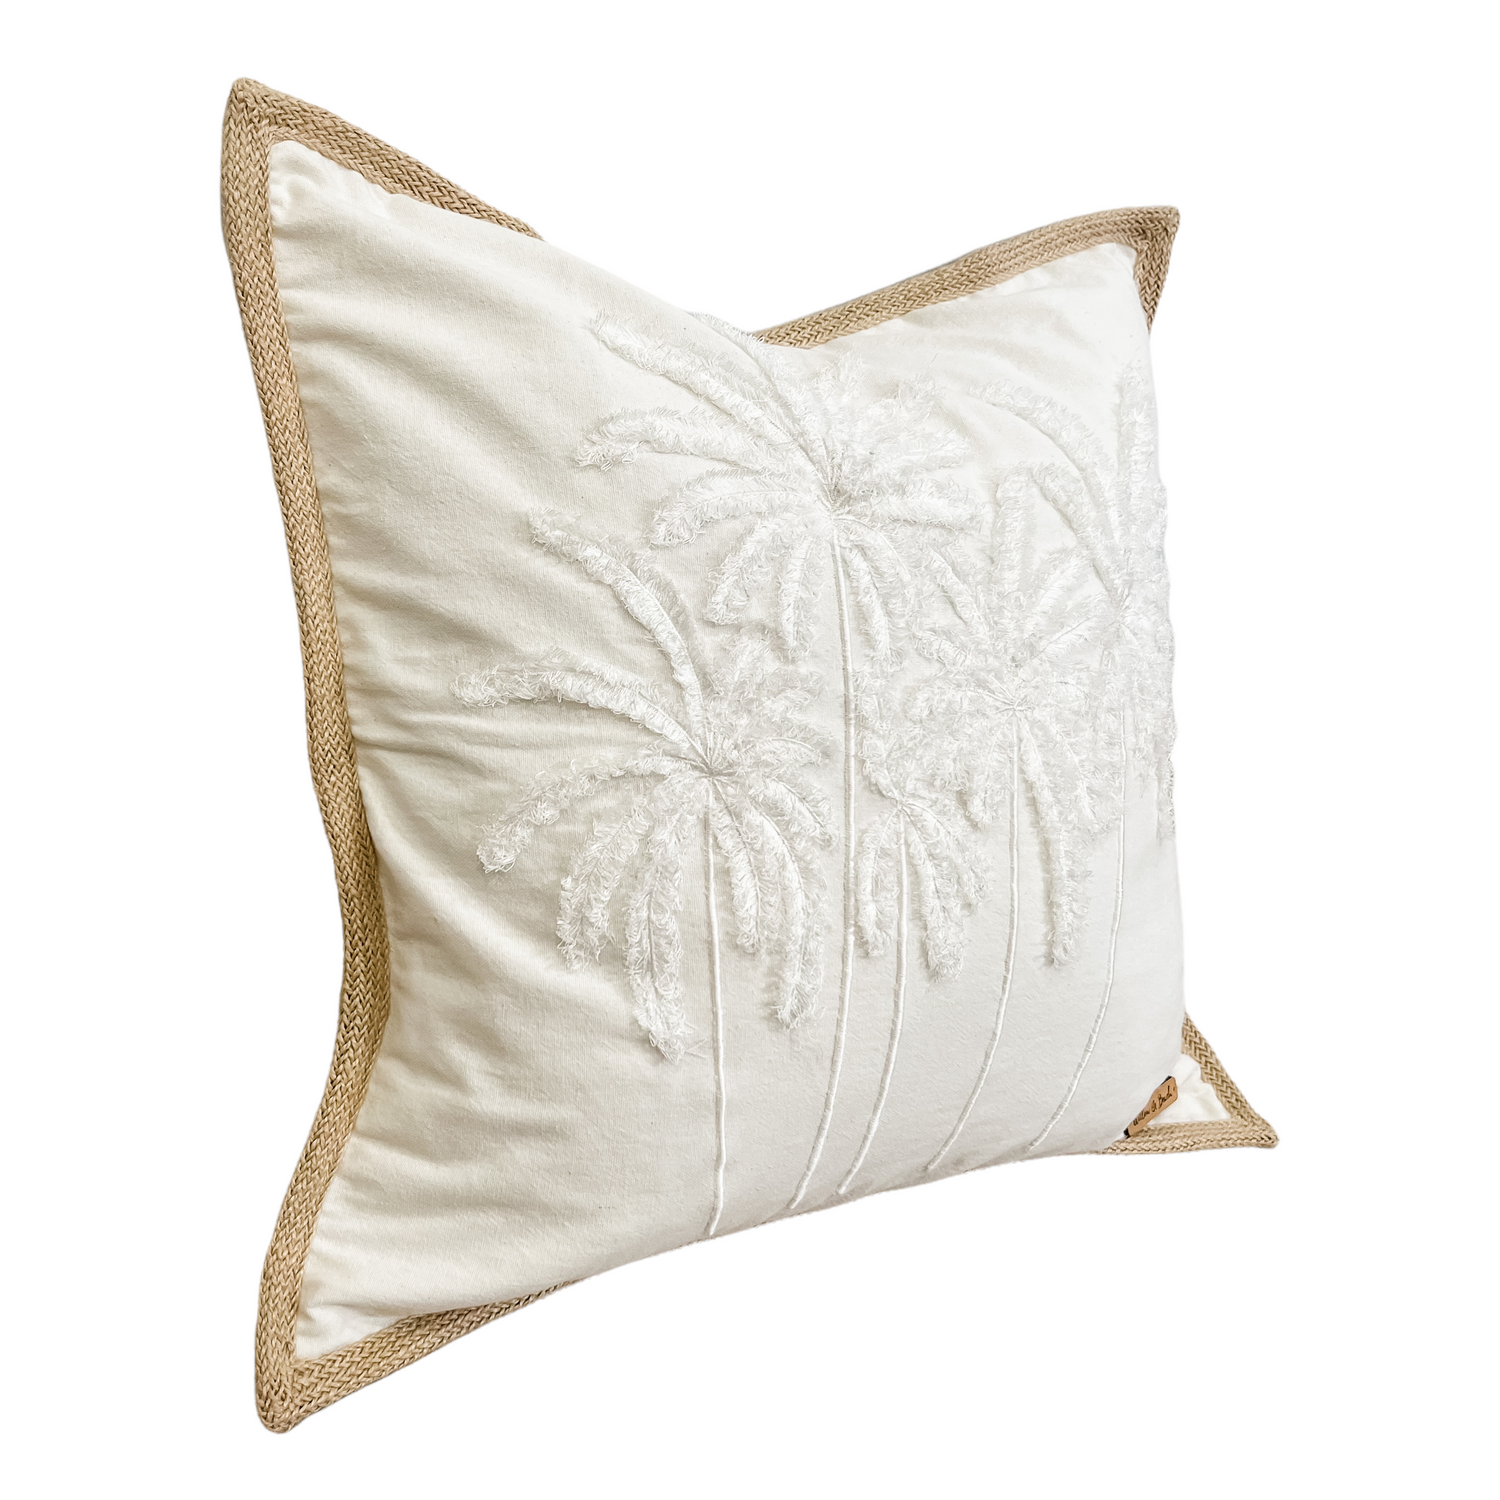 Shoreline Cushion Cover featuring palm embroidery and jute border